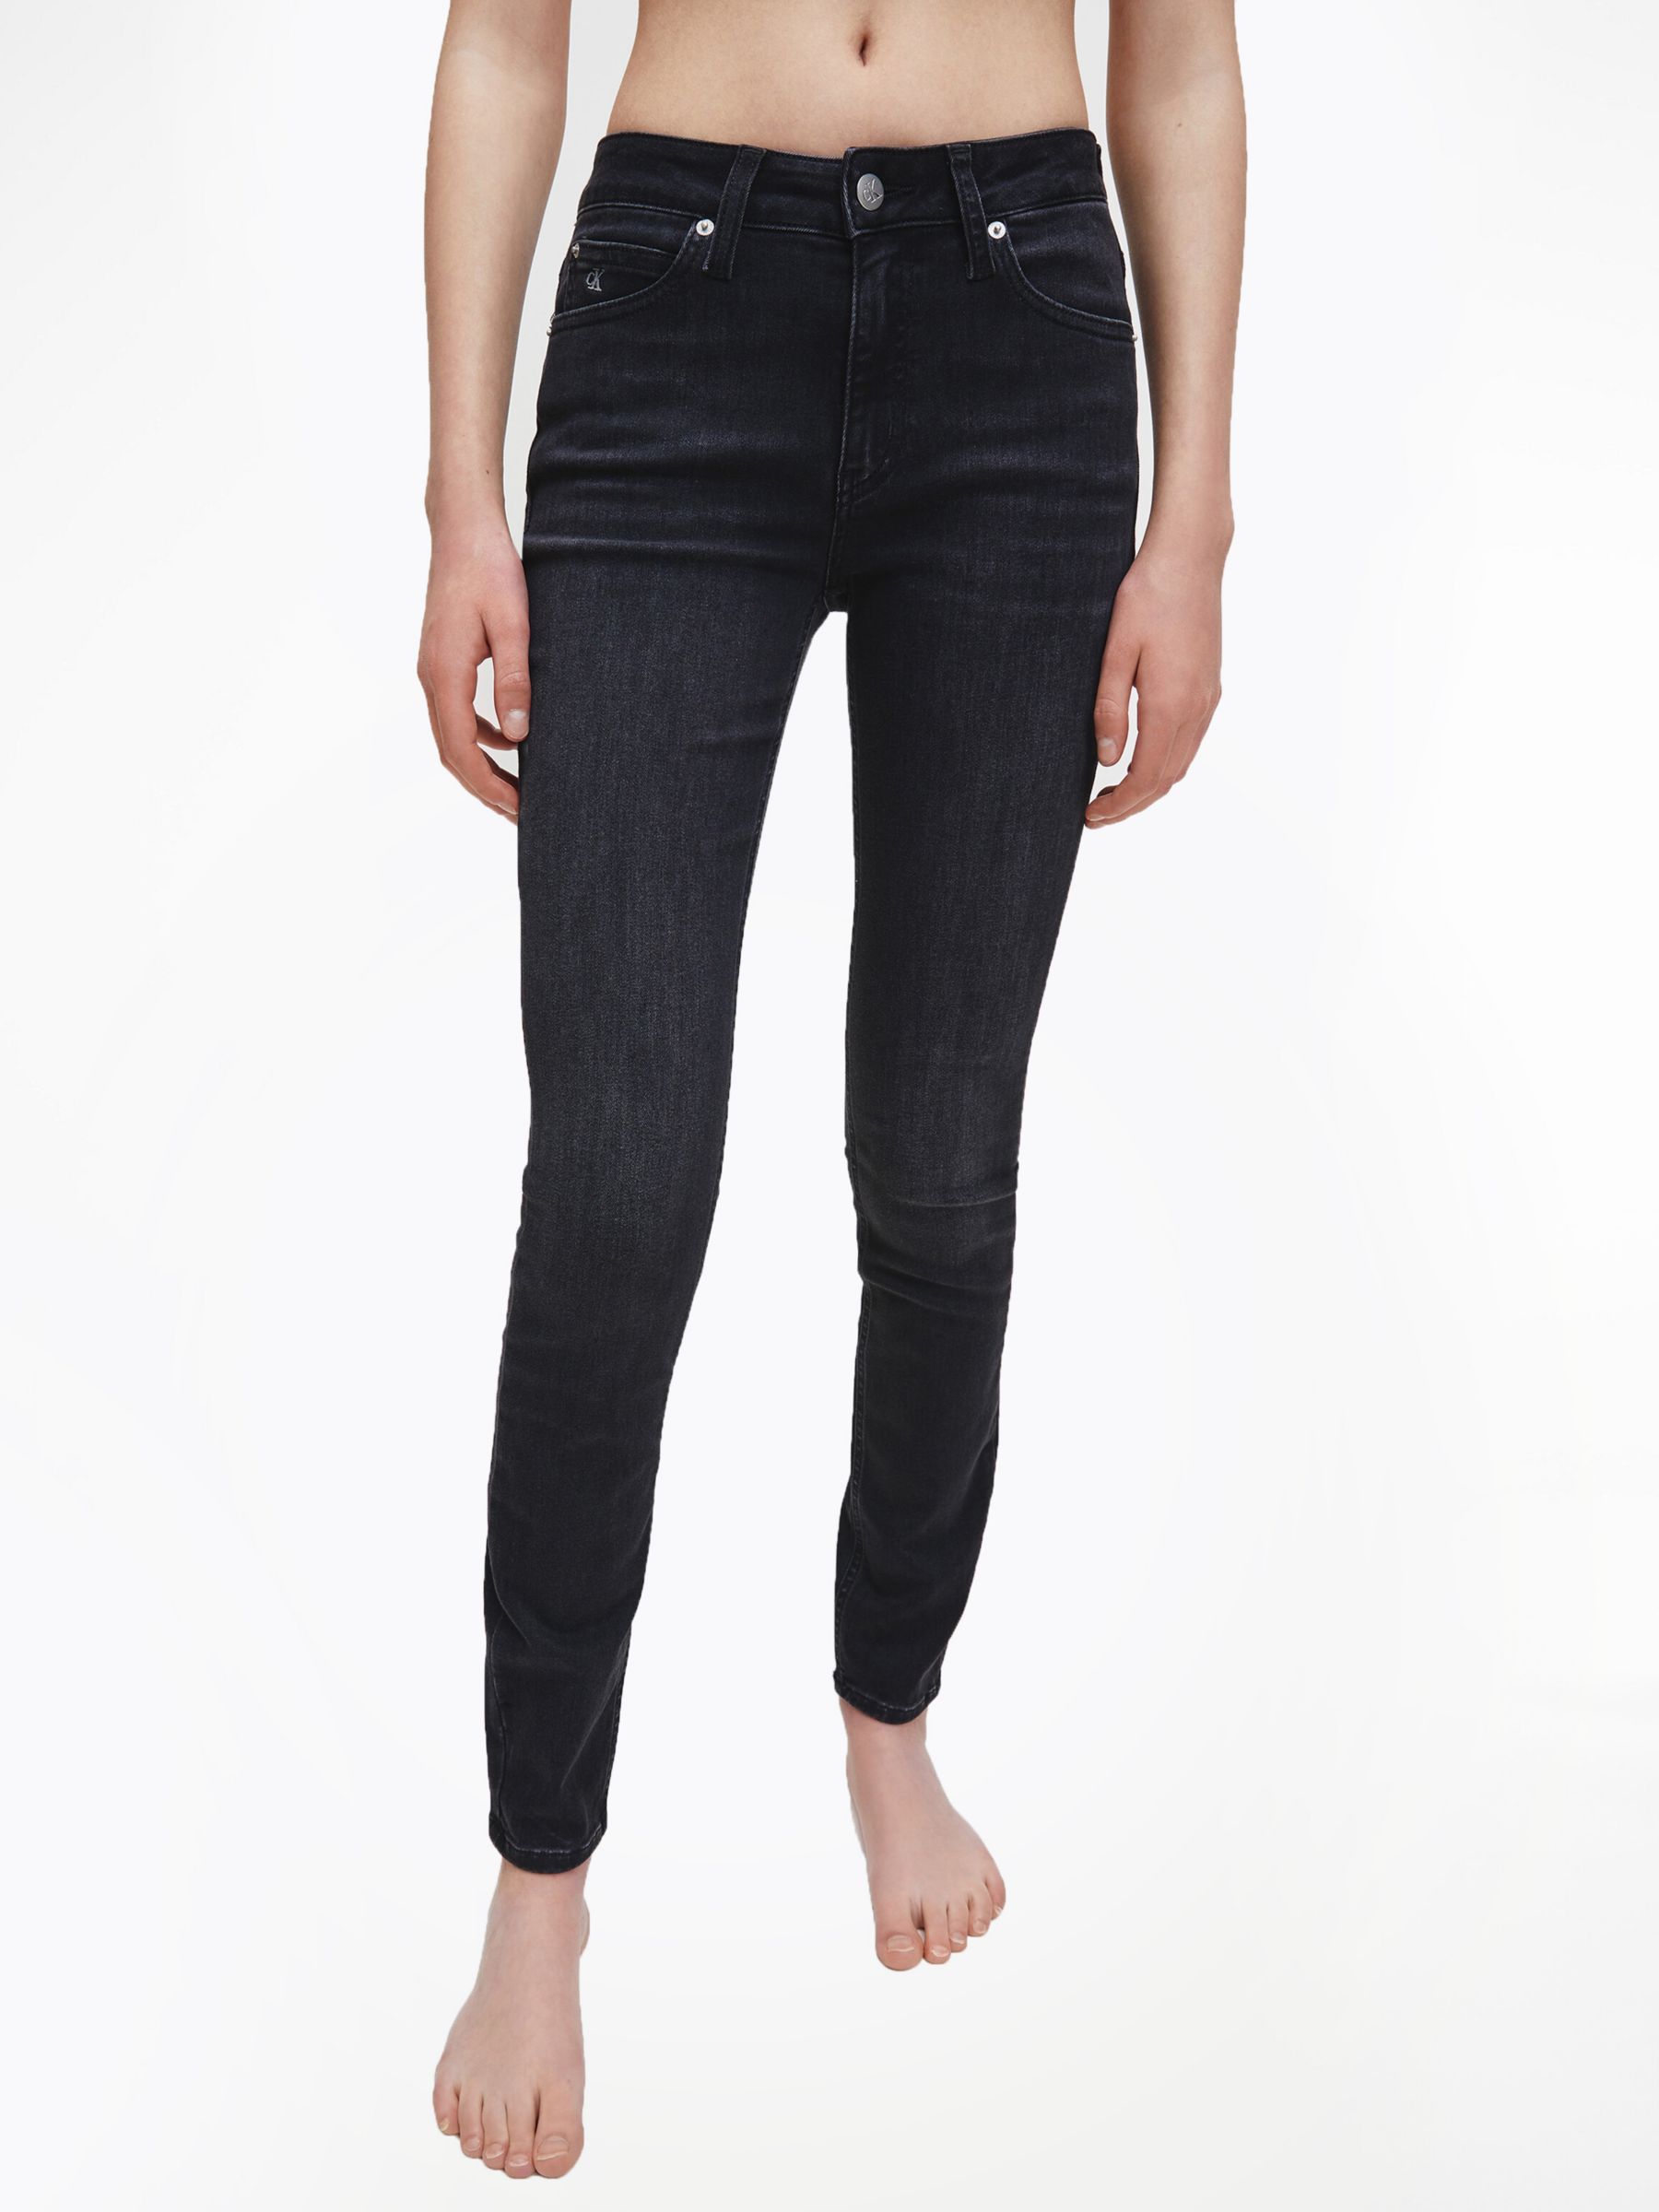 Calvin Klein Mid Rise Skinny Jeans, Washed Black at John Lewis & Partners